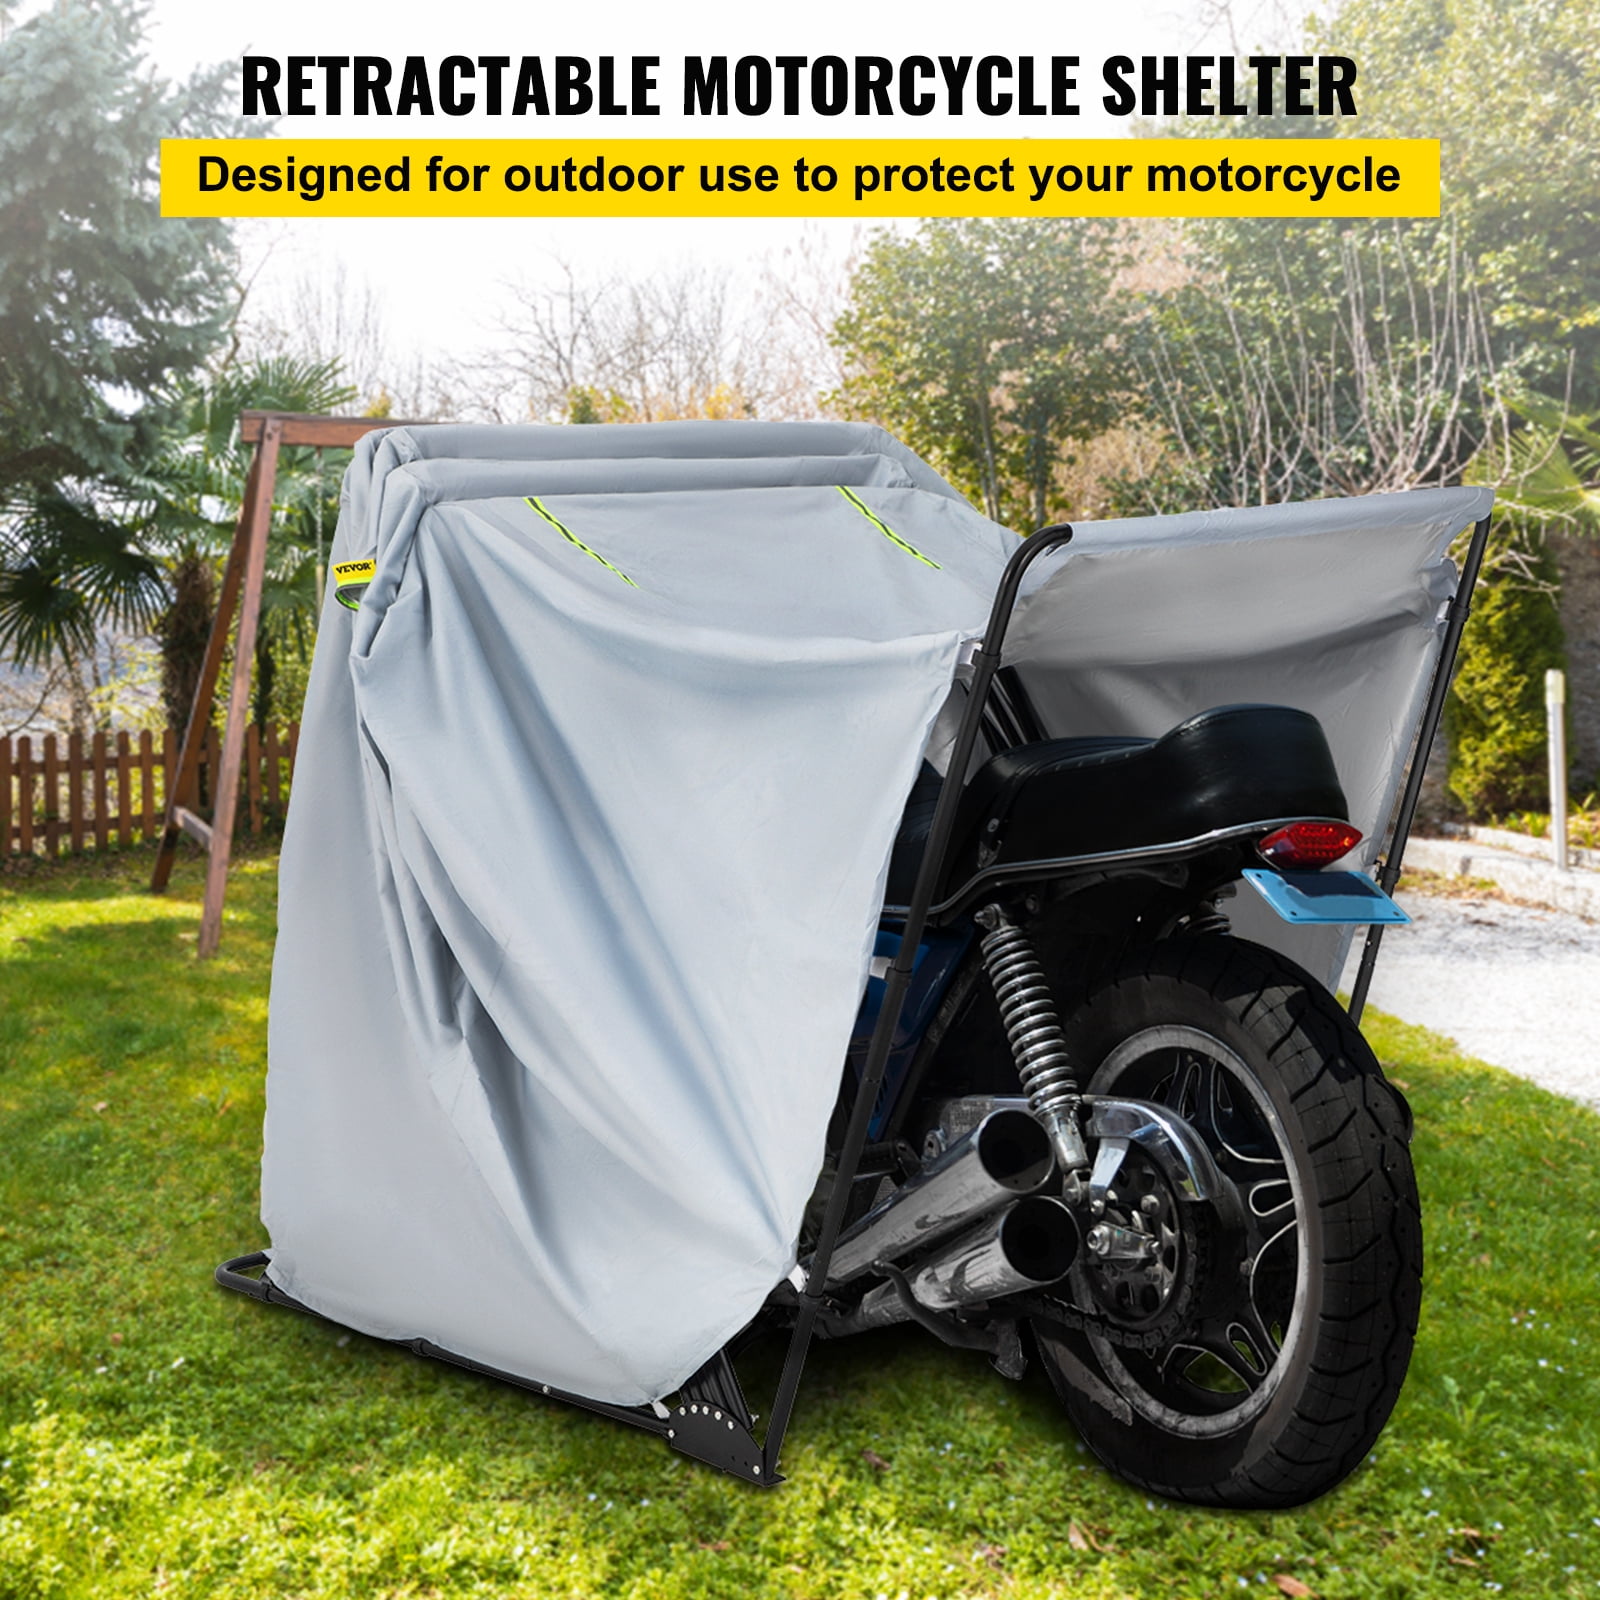 NEVERLAND Motorcycle Cover Waterproof Outdoor Storage Bag Fits up to 116 Motors Universal Motor Scooter Protective Covers with 2 Reflective Strips Heavy Duty 420D Denier Oxford Cloth 